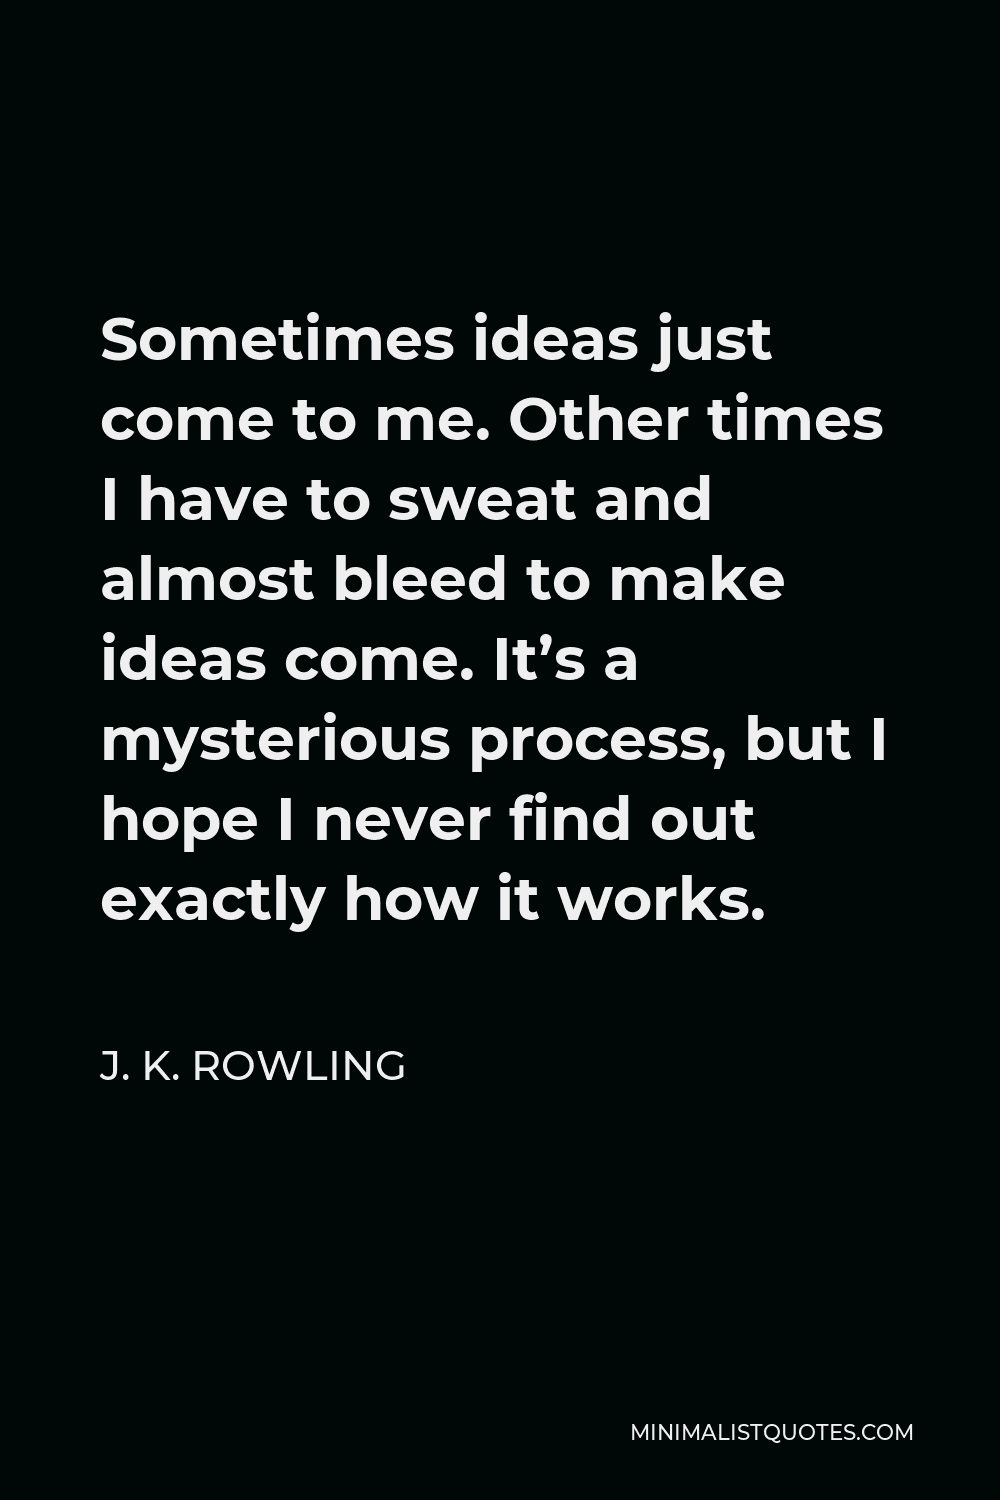 J. K. Rowling Quote - Sometimes ideas just come to me. Other times I have to sweat and almost bleed to make ideas come. It’s a mysterious process, but I hope I never find out exactly how it works.